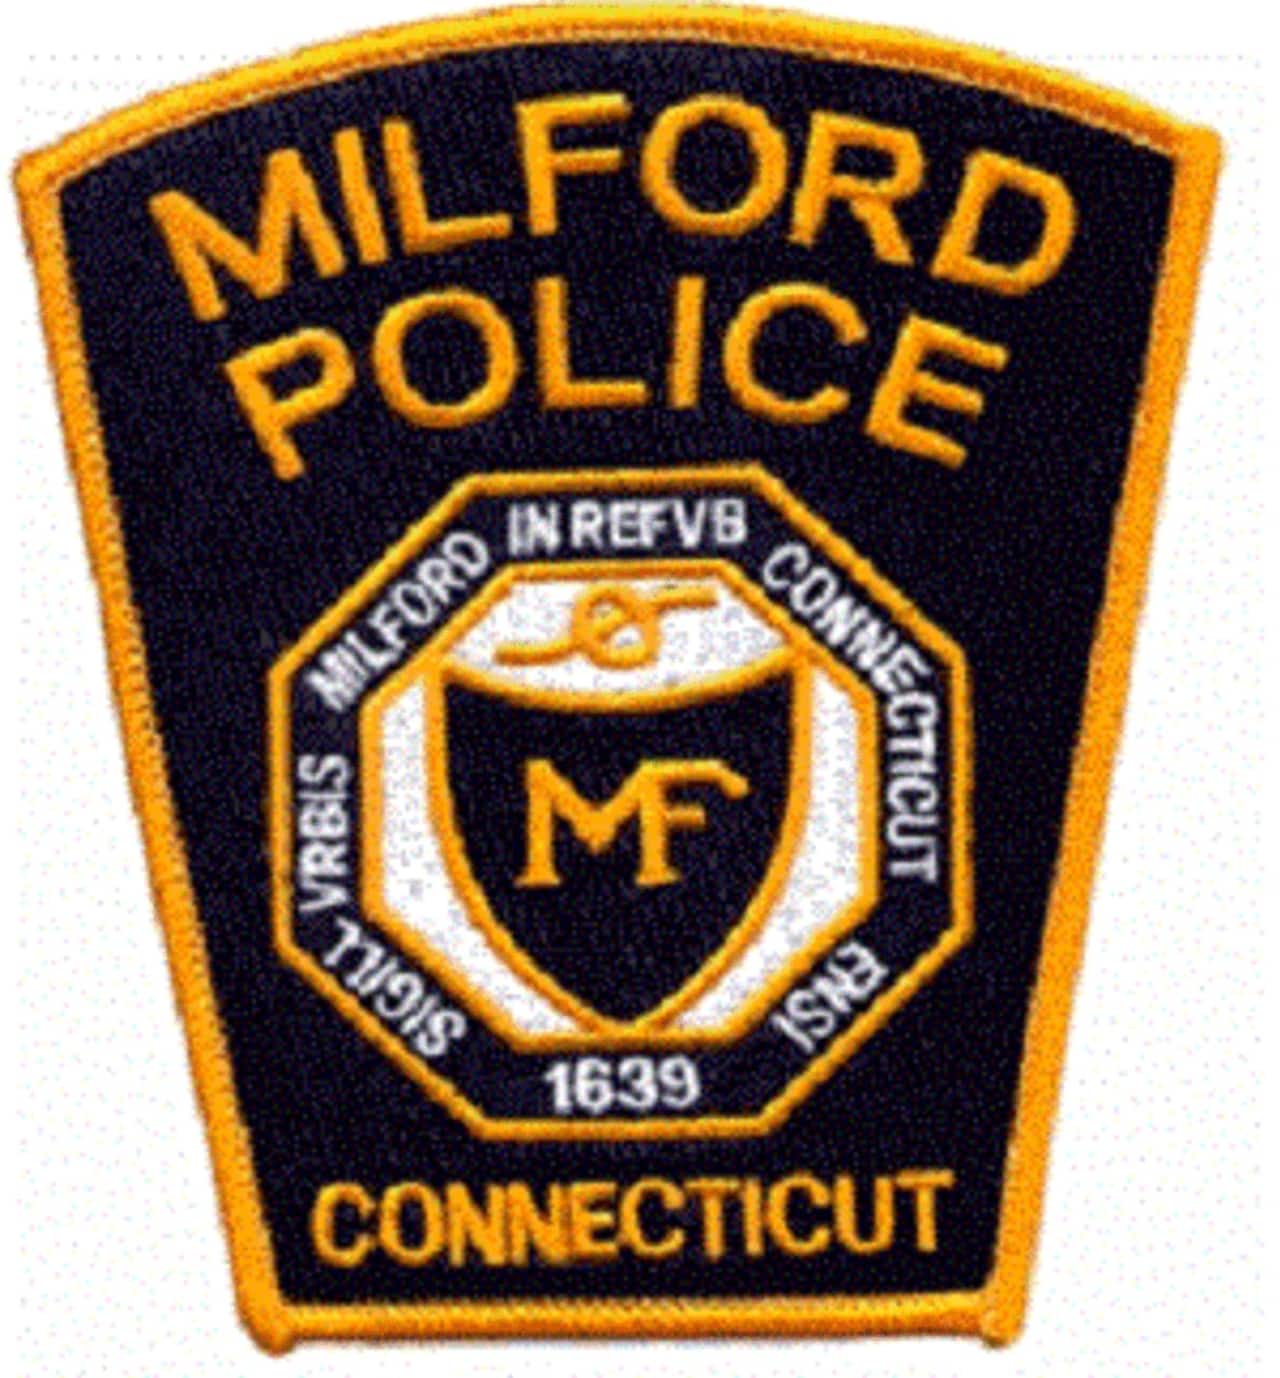 A Bethel man was charged with drunken driving in Milford after a one-car crash.